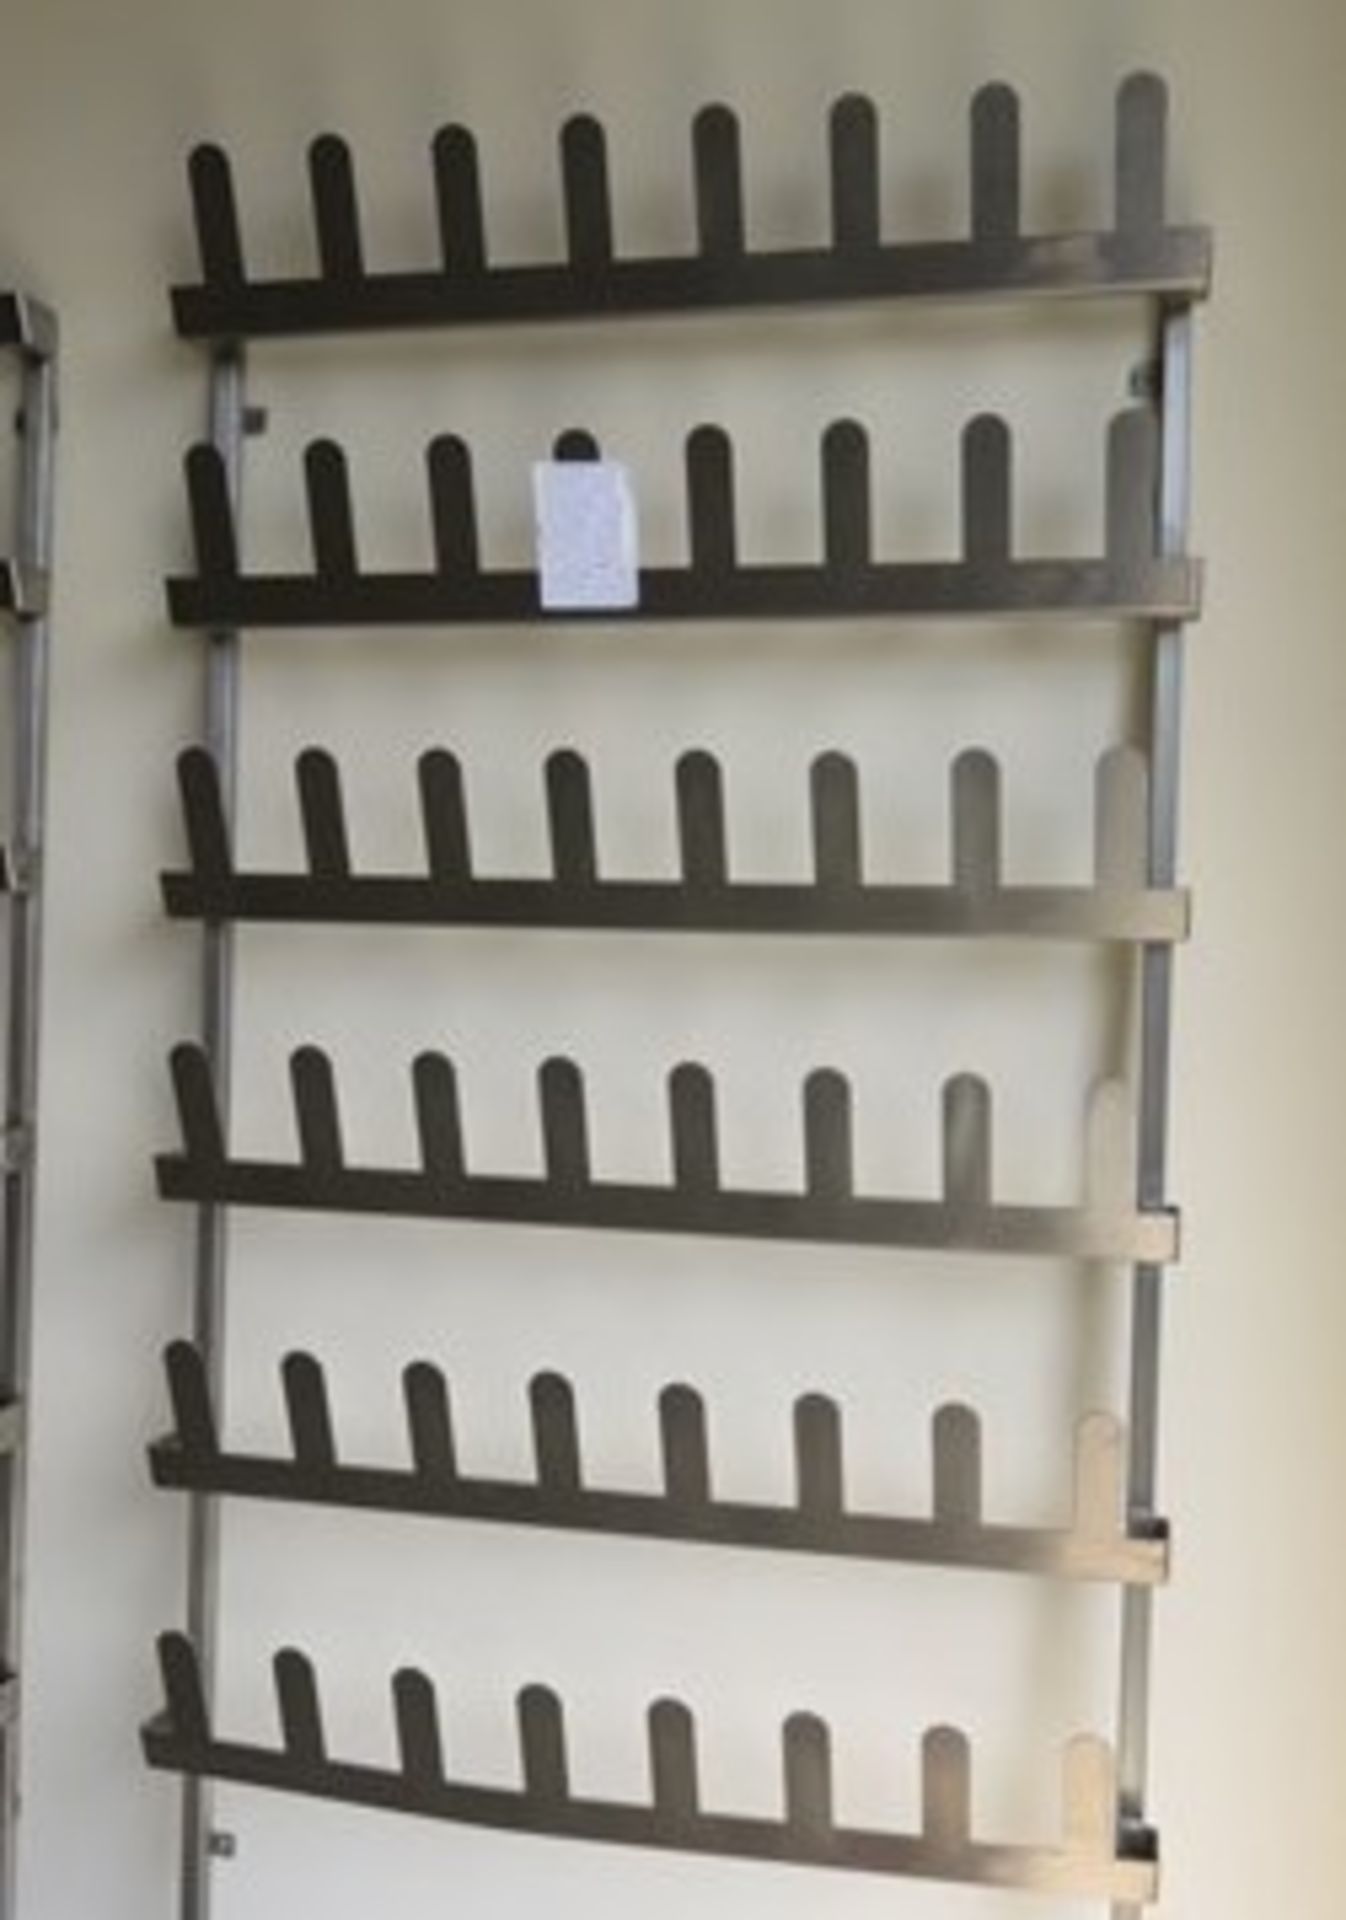 Shoe Holder. Totally S/s. Wall Mounted. Holds 24 Pairs. Approx. 2 mtr x 1mtr